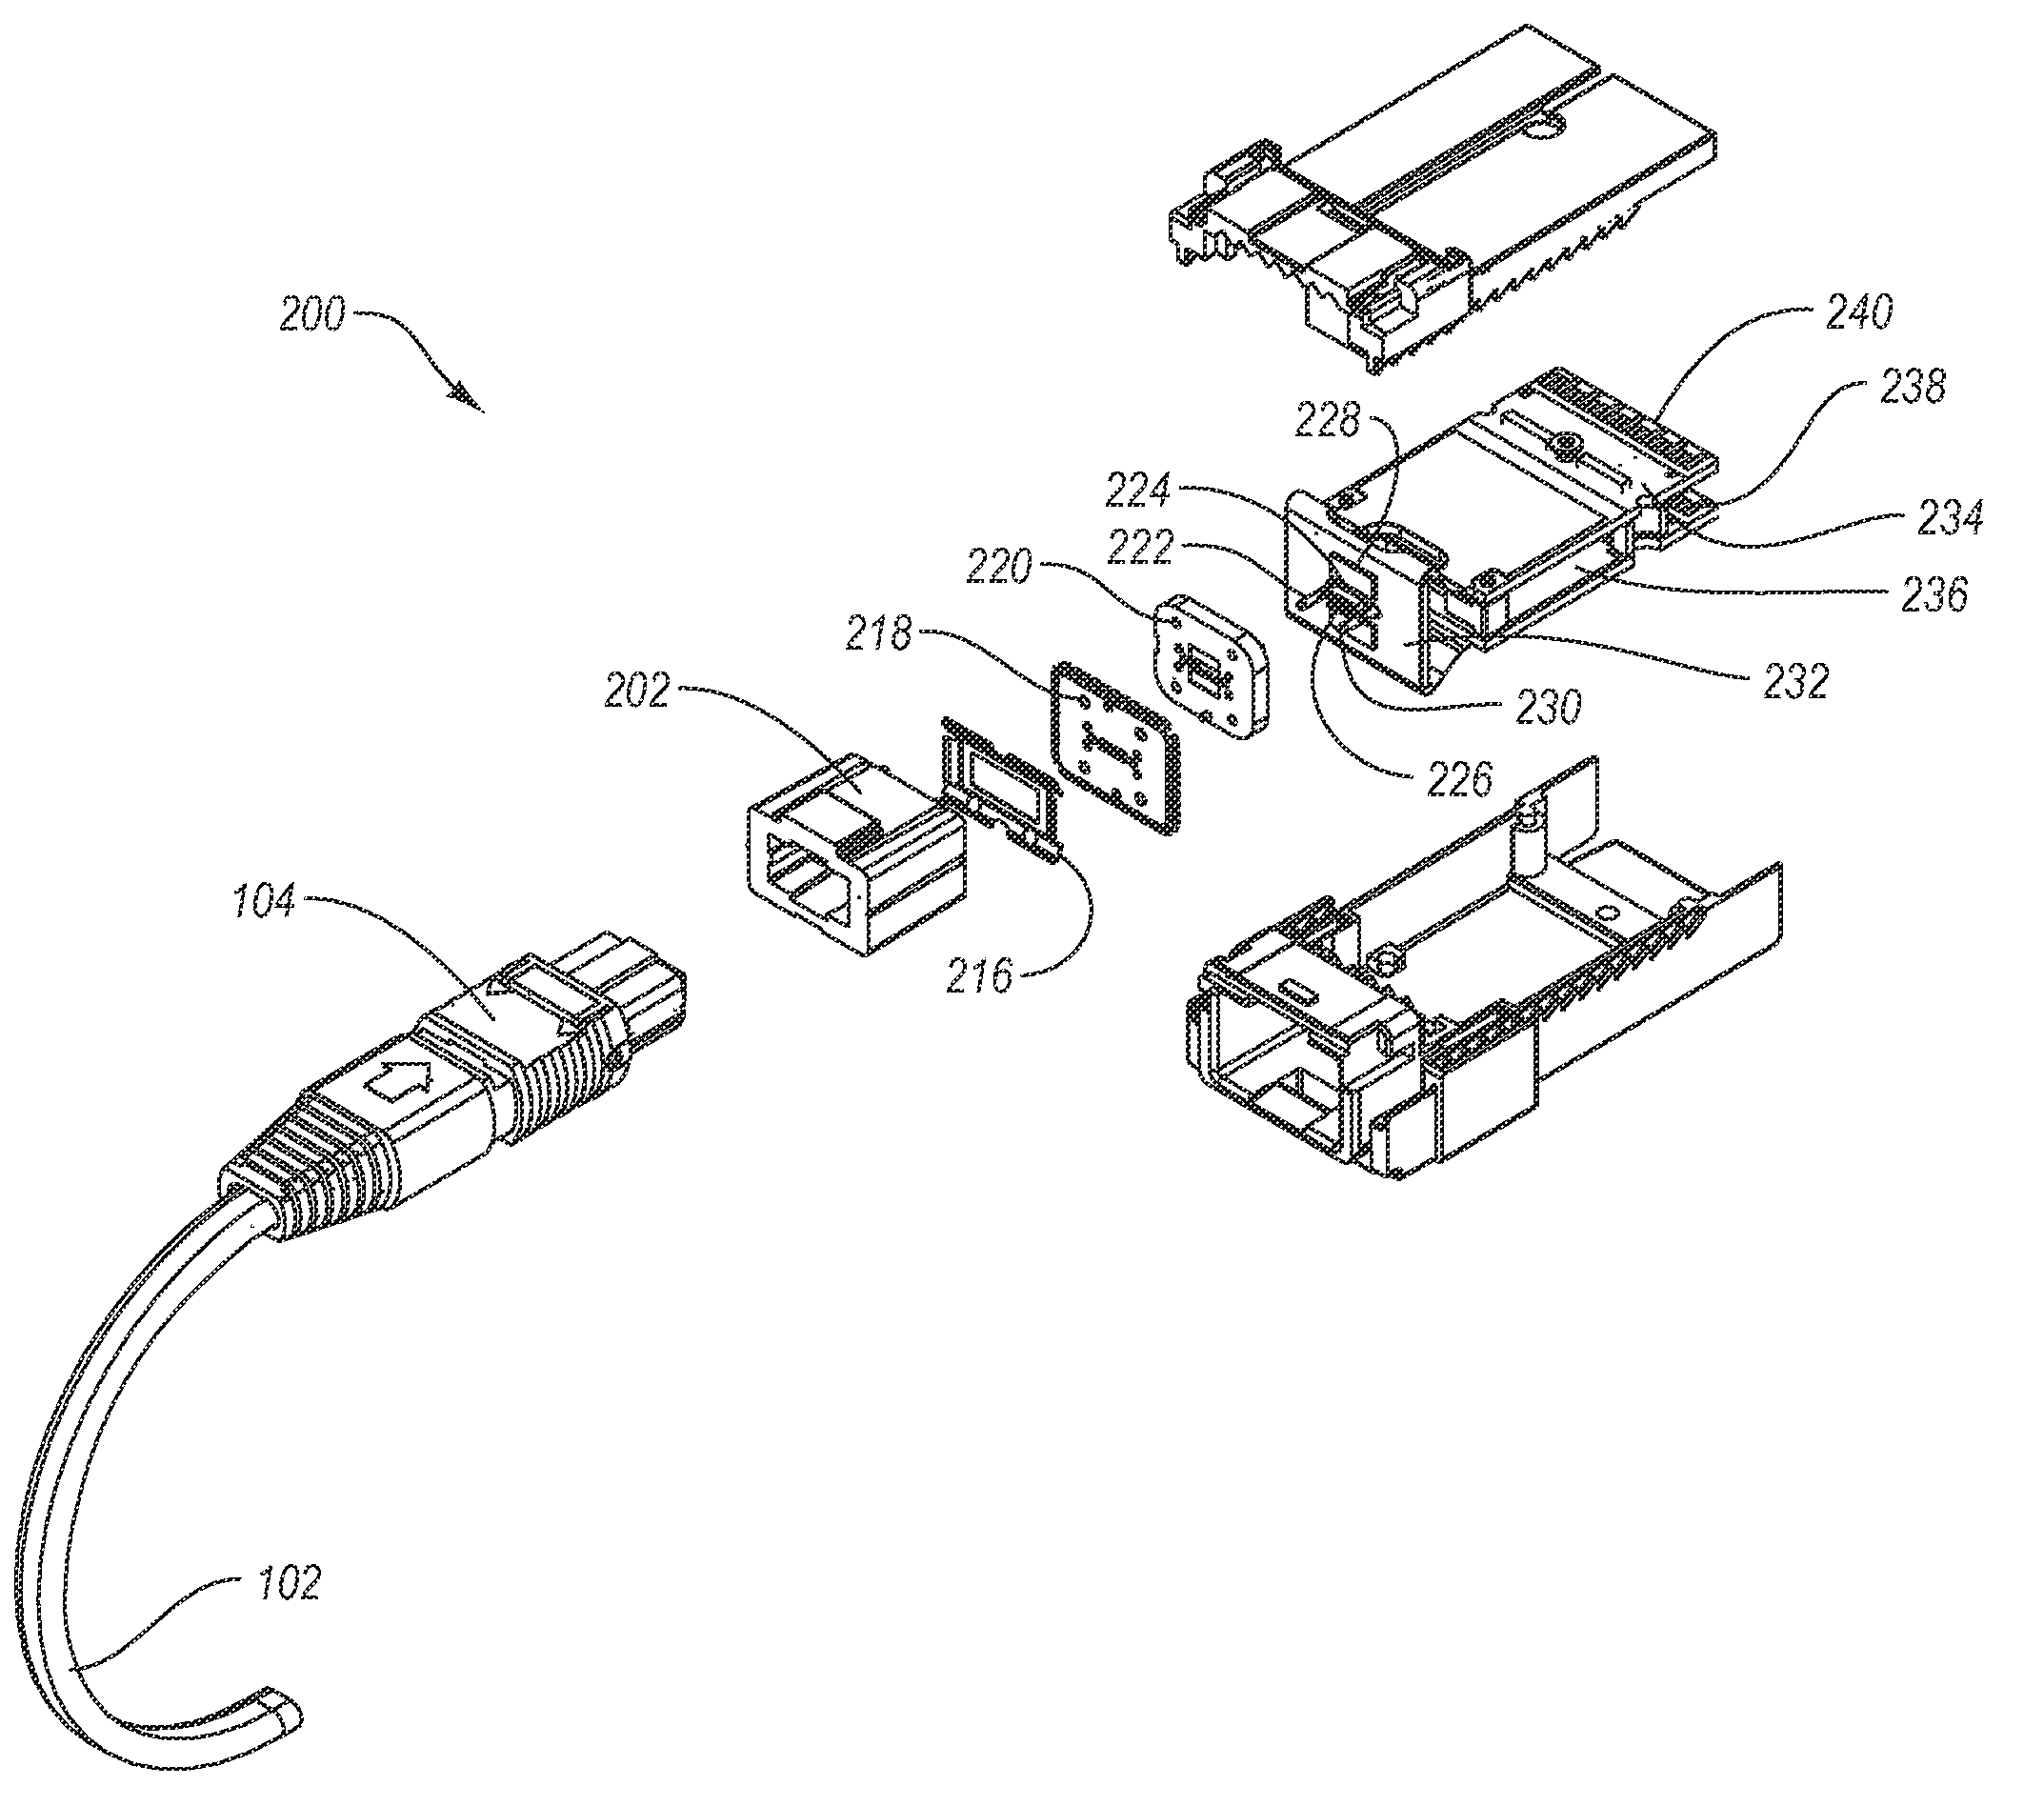 Transceiver module with dual printed circuit boards